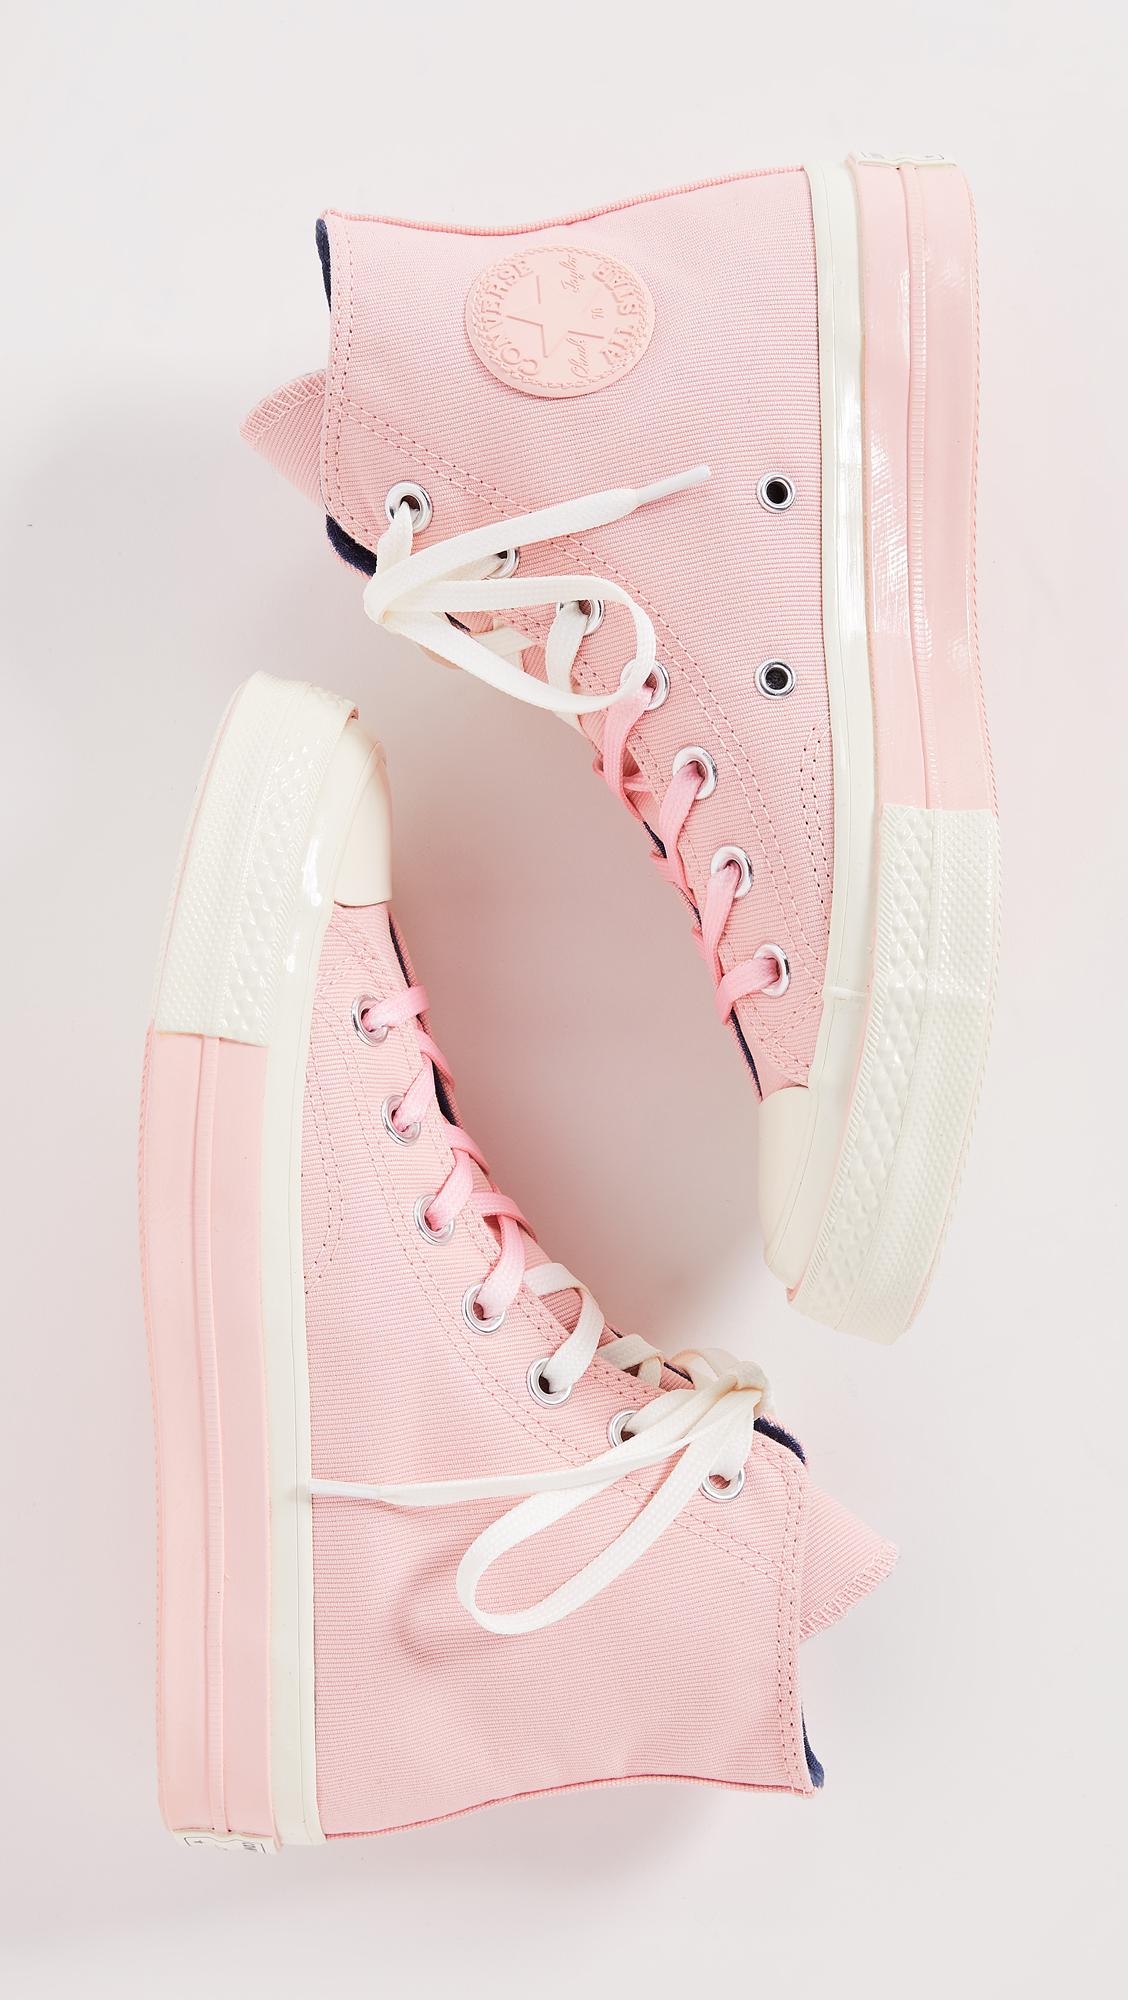 Converse Chuck 70s High Top Super Colorblock Sneakers in Pink | Lyst